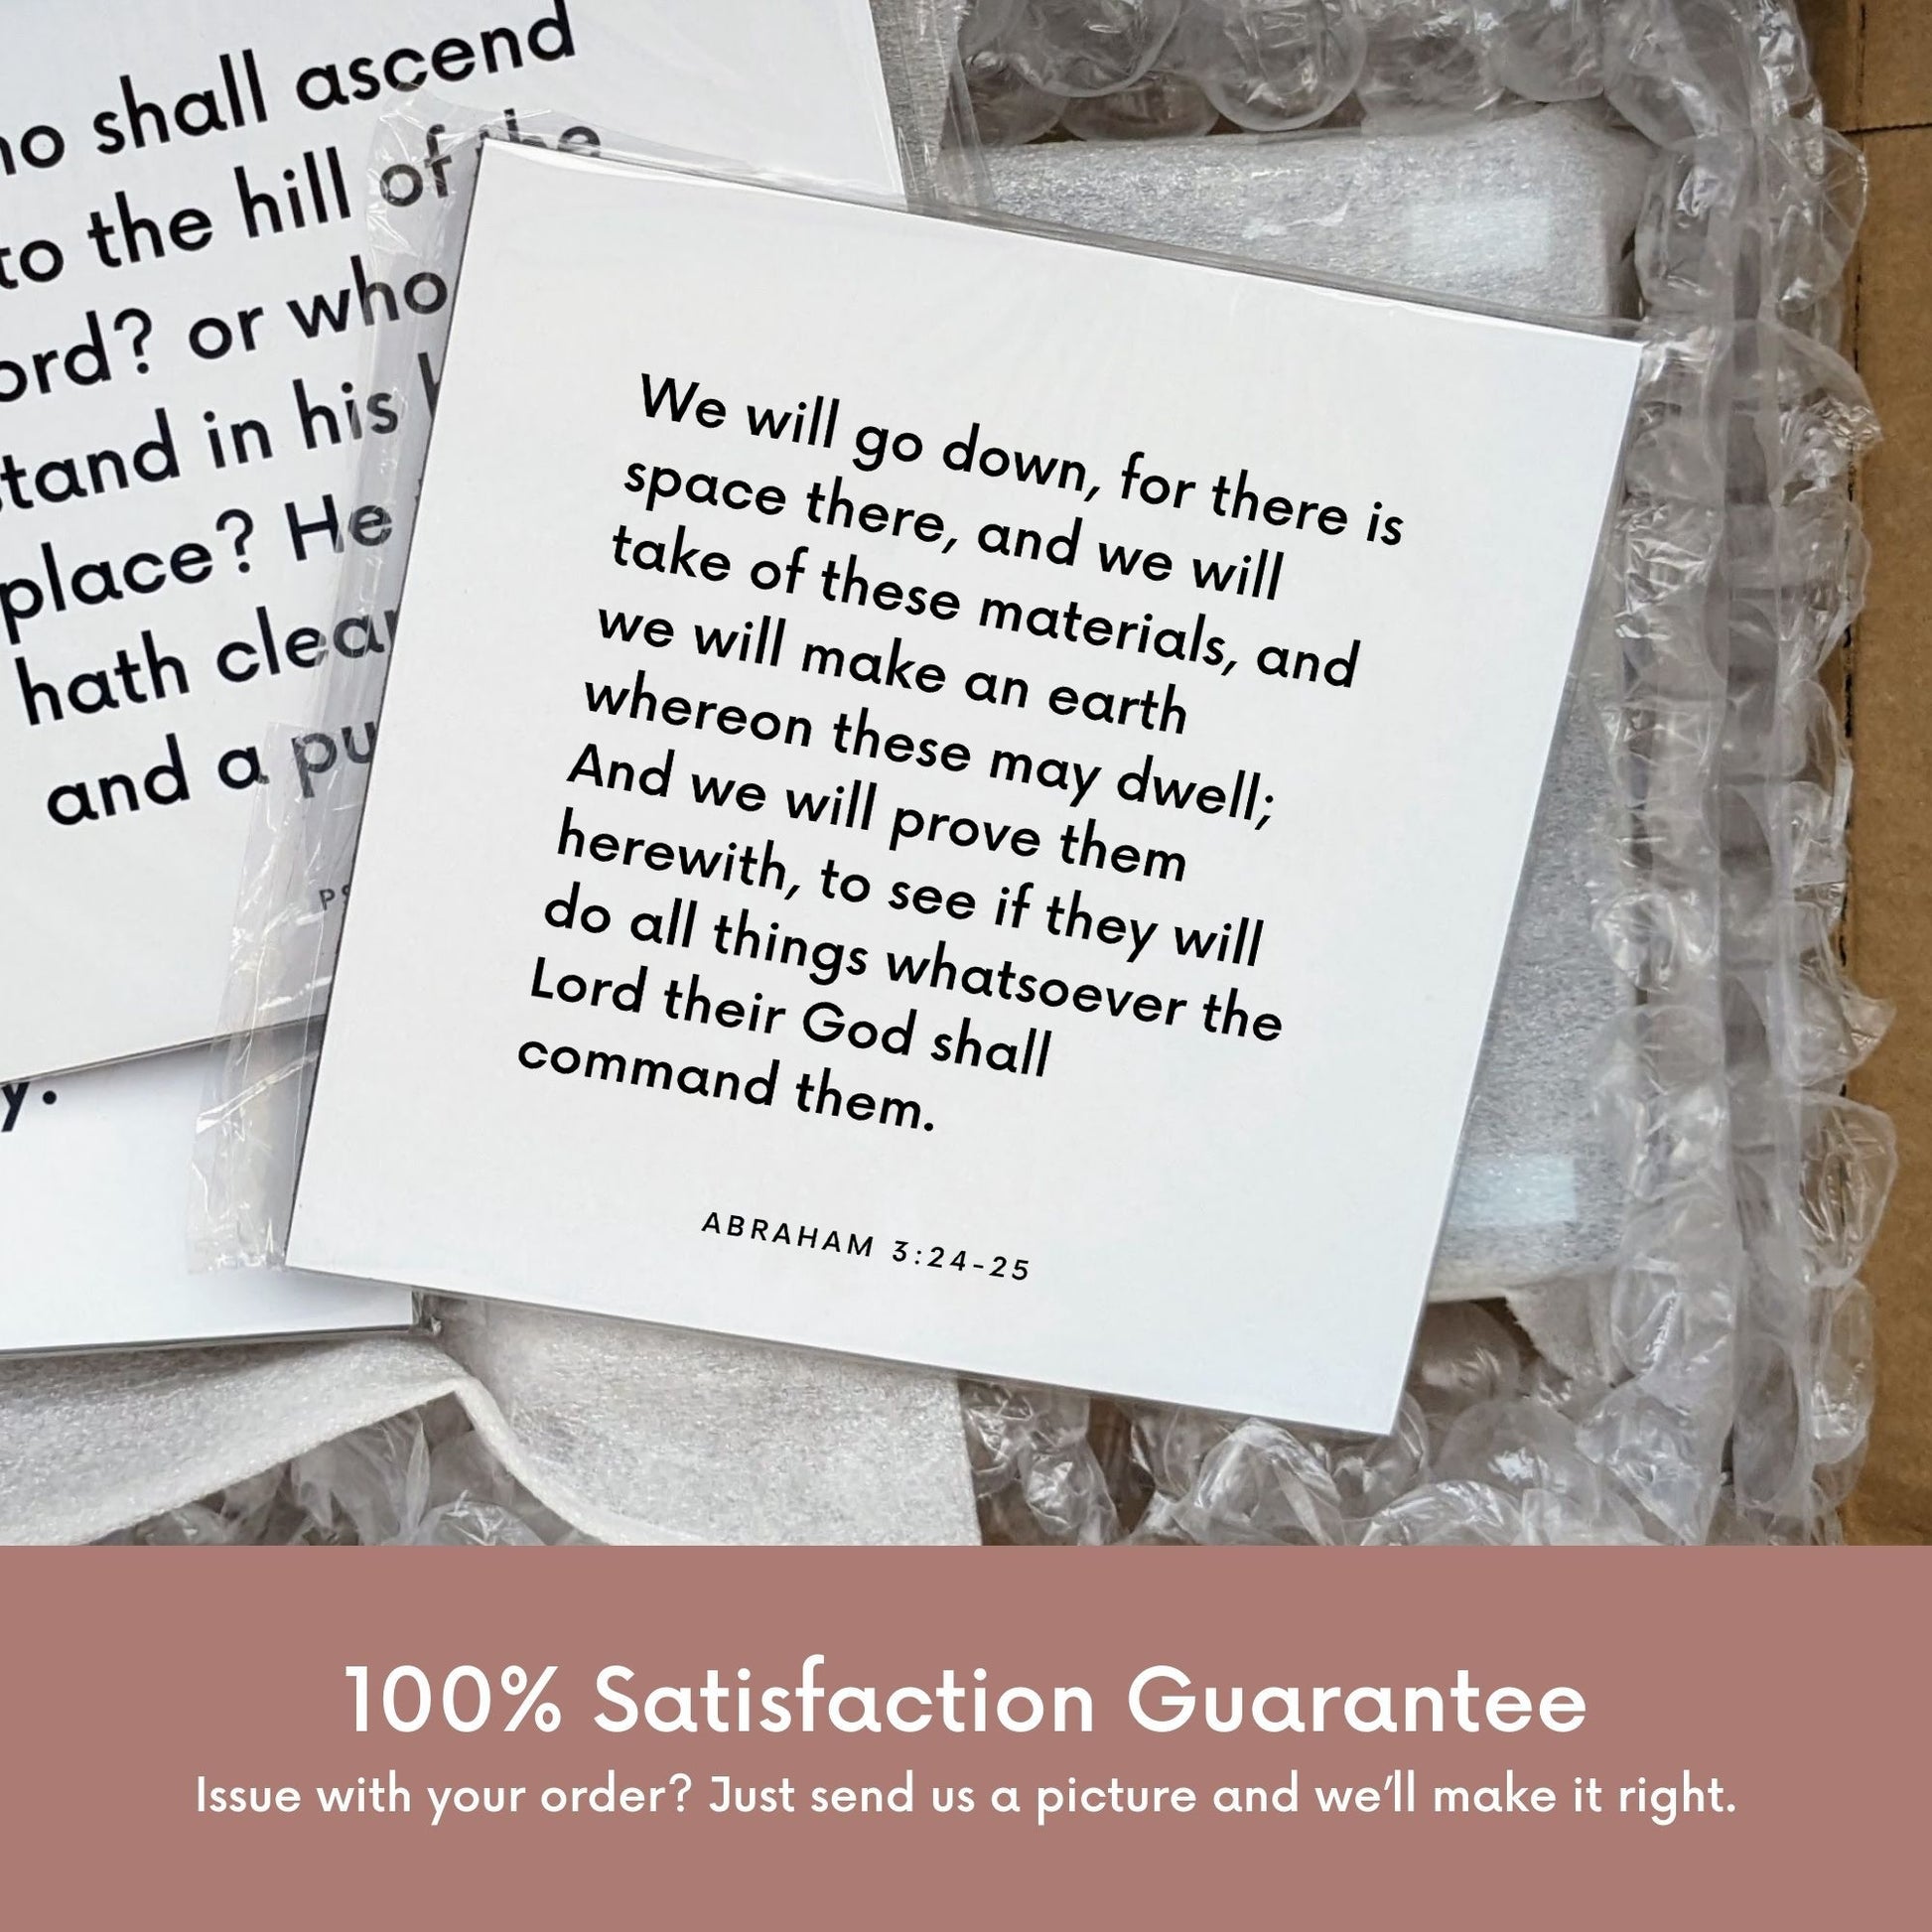 Shipping materials for scripture tile of Abraham 3:24-25 - "And we will prove them herewith"